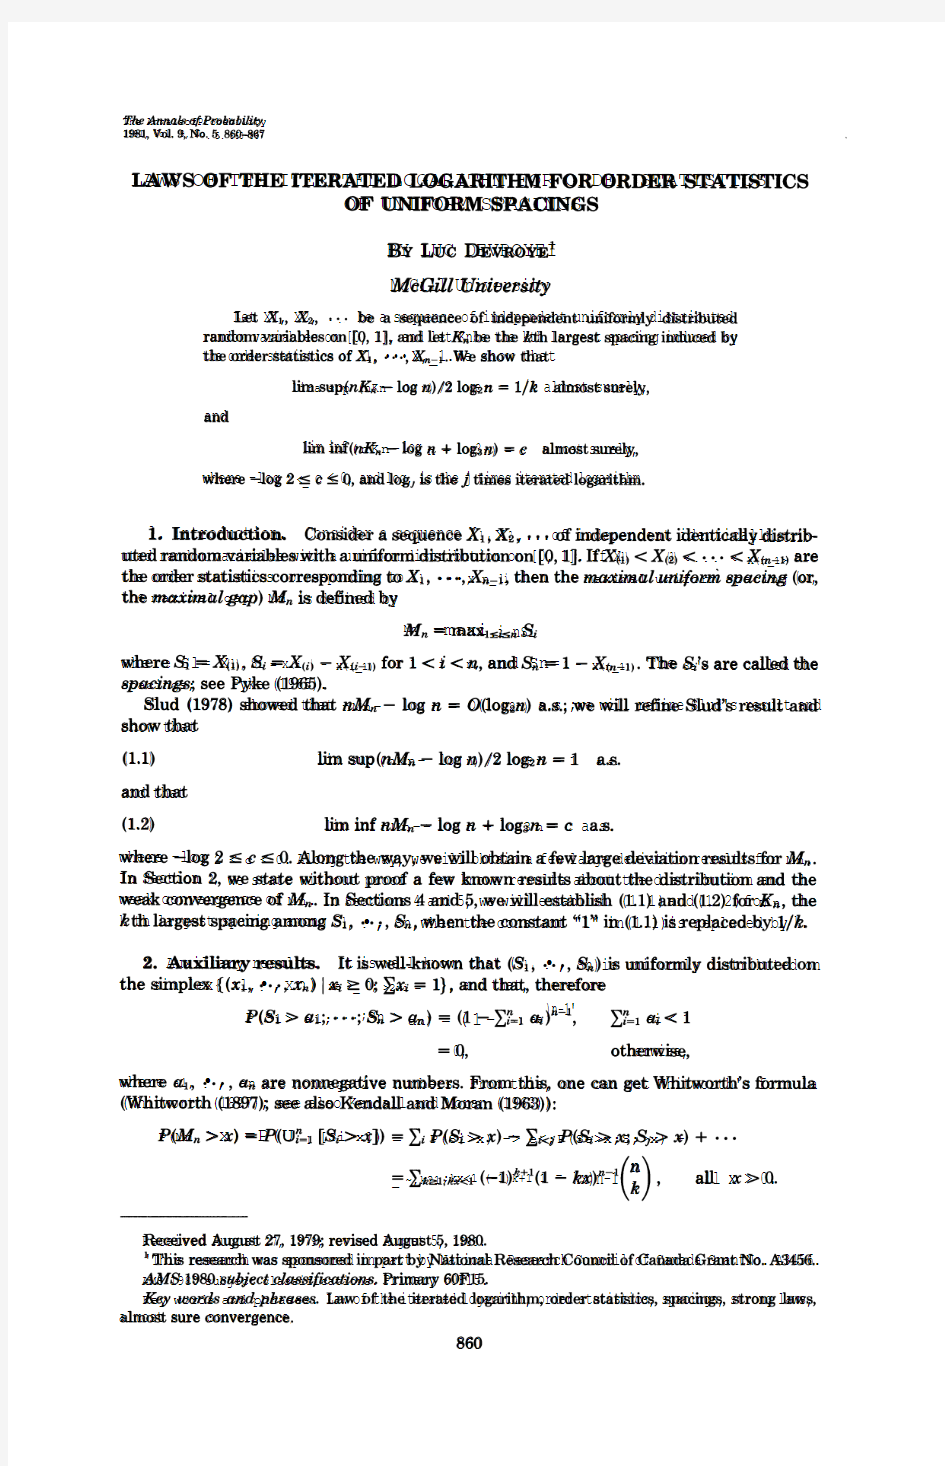 LAWS OF THE ITERATED LOGARITHM FOR ORDER STATISTICS OF UNIFORM SPACINGS BY LUC DEVROYE I